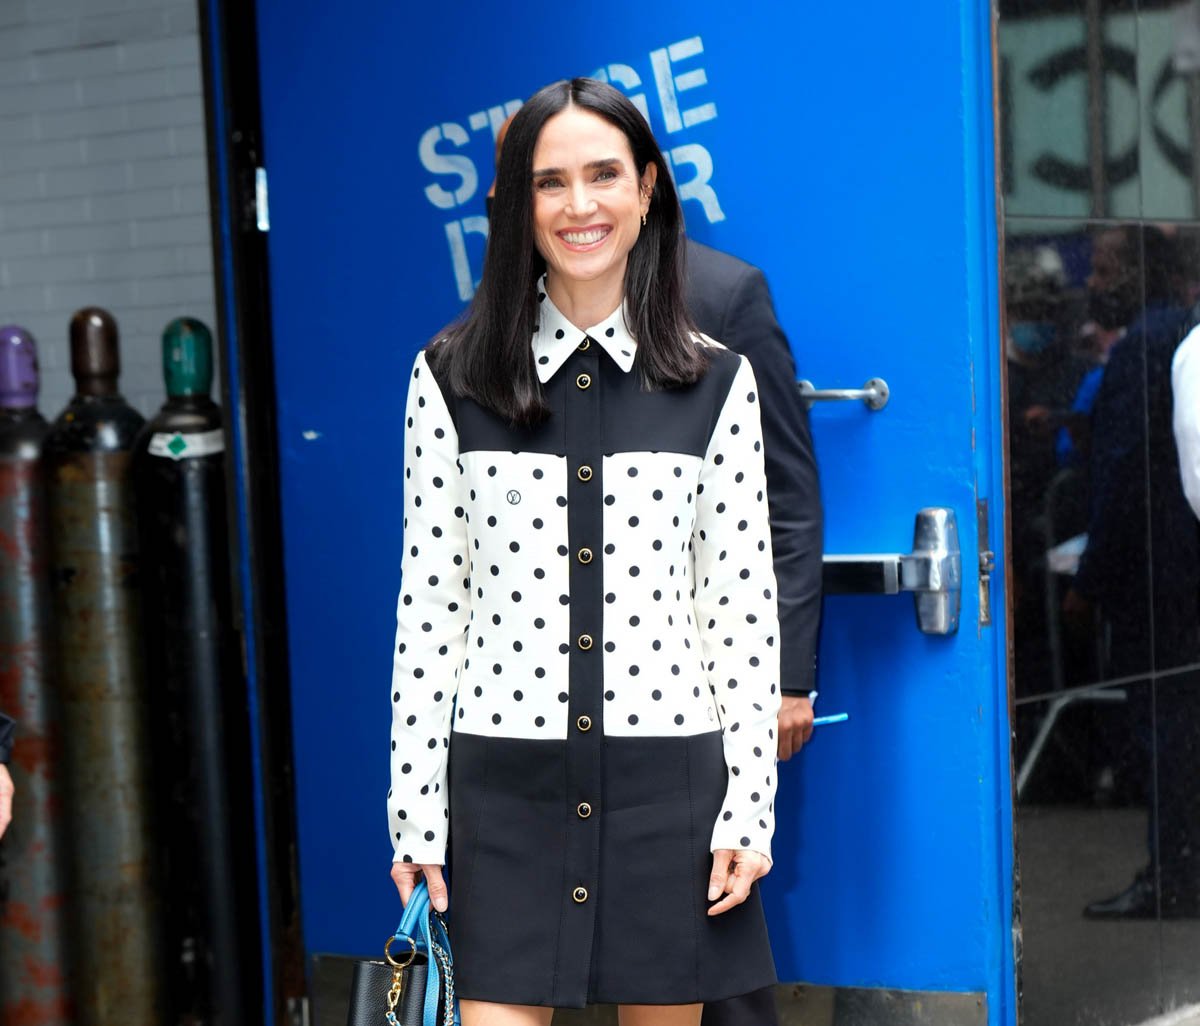 Jennifer Connelly in Louis Vuitton at The Late Show with Stephen Colbert &  Good Morning America